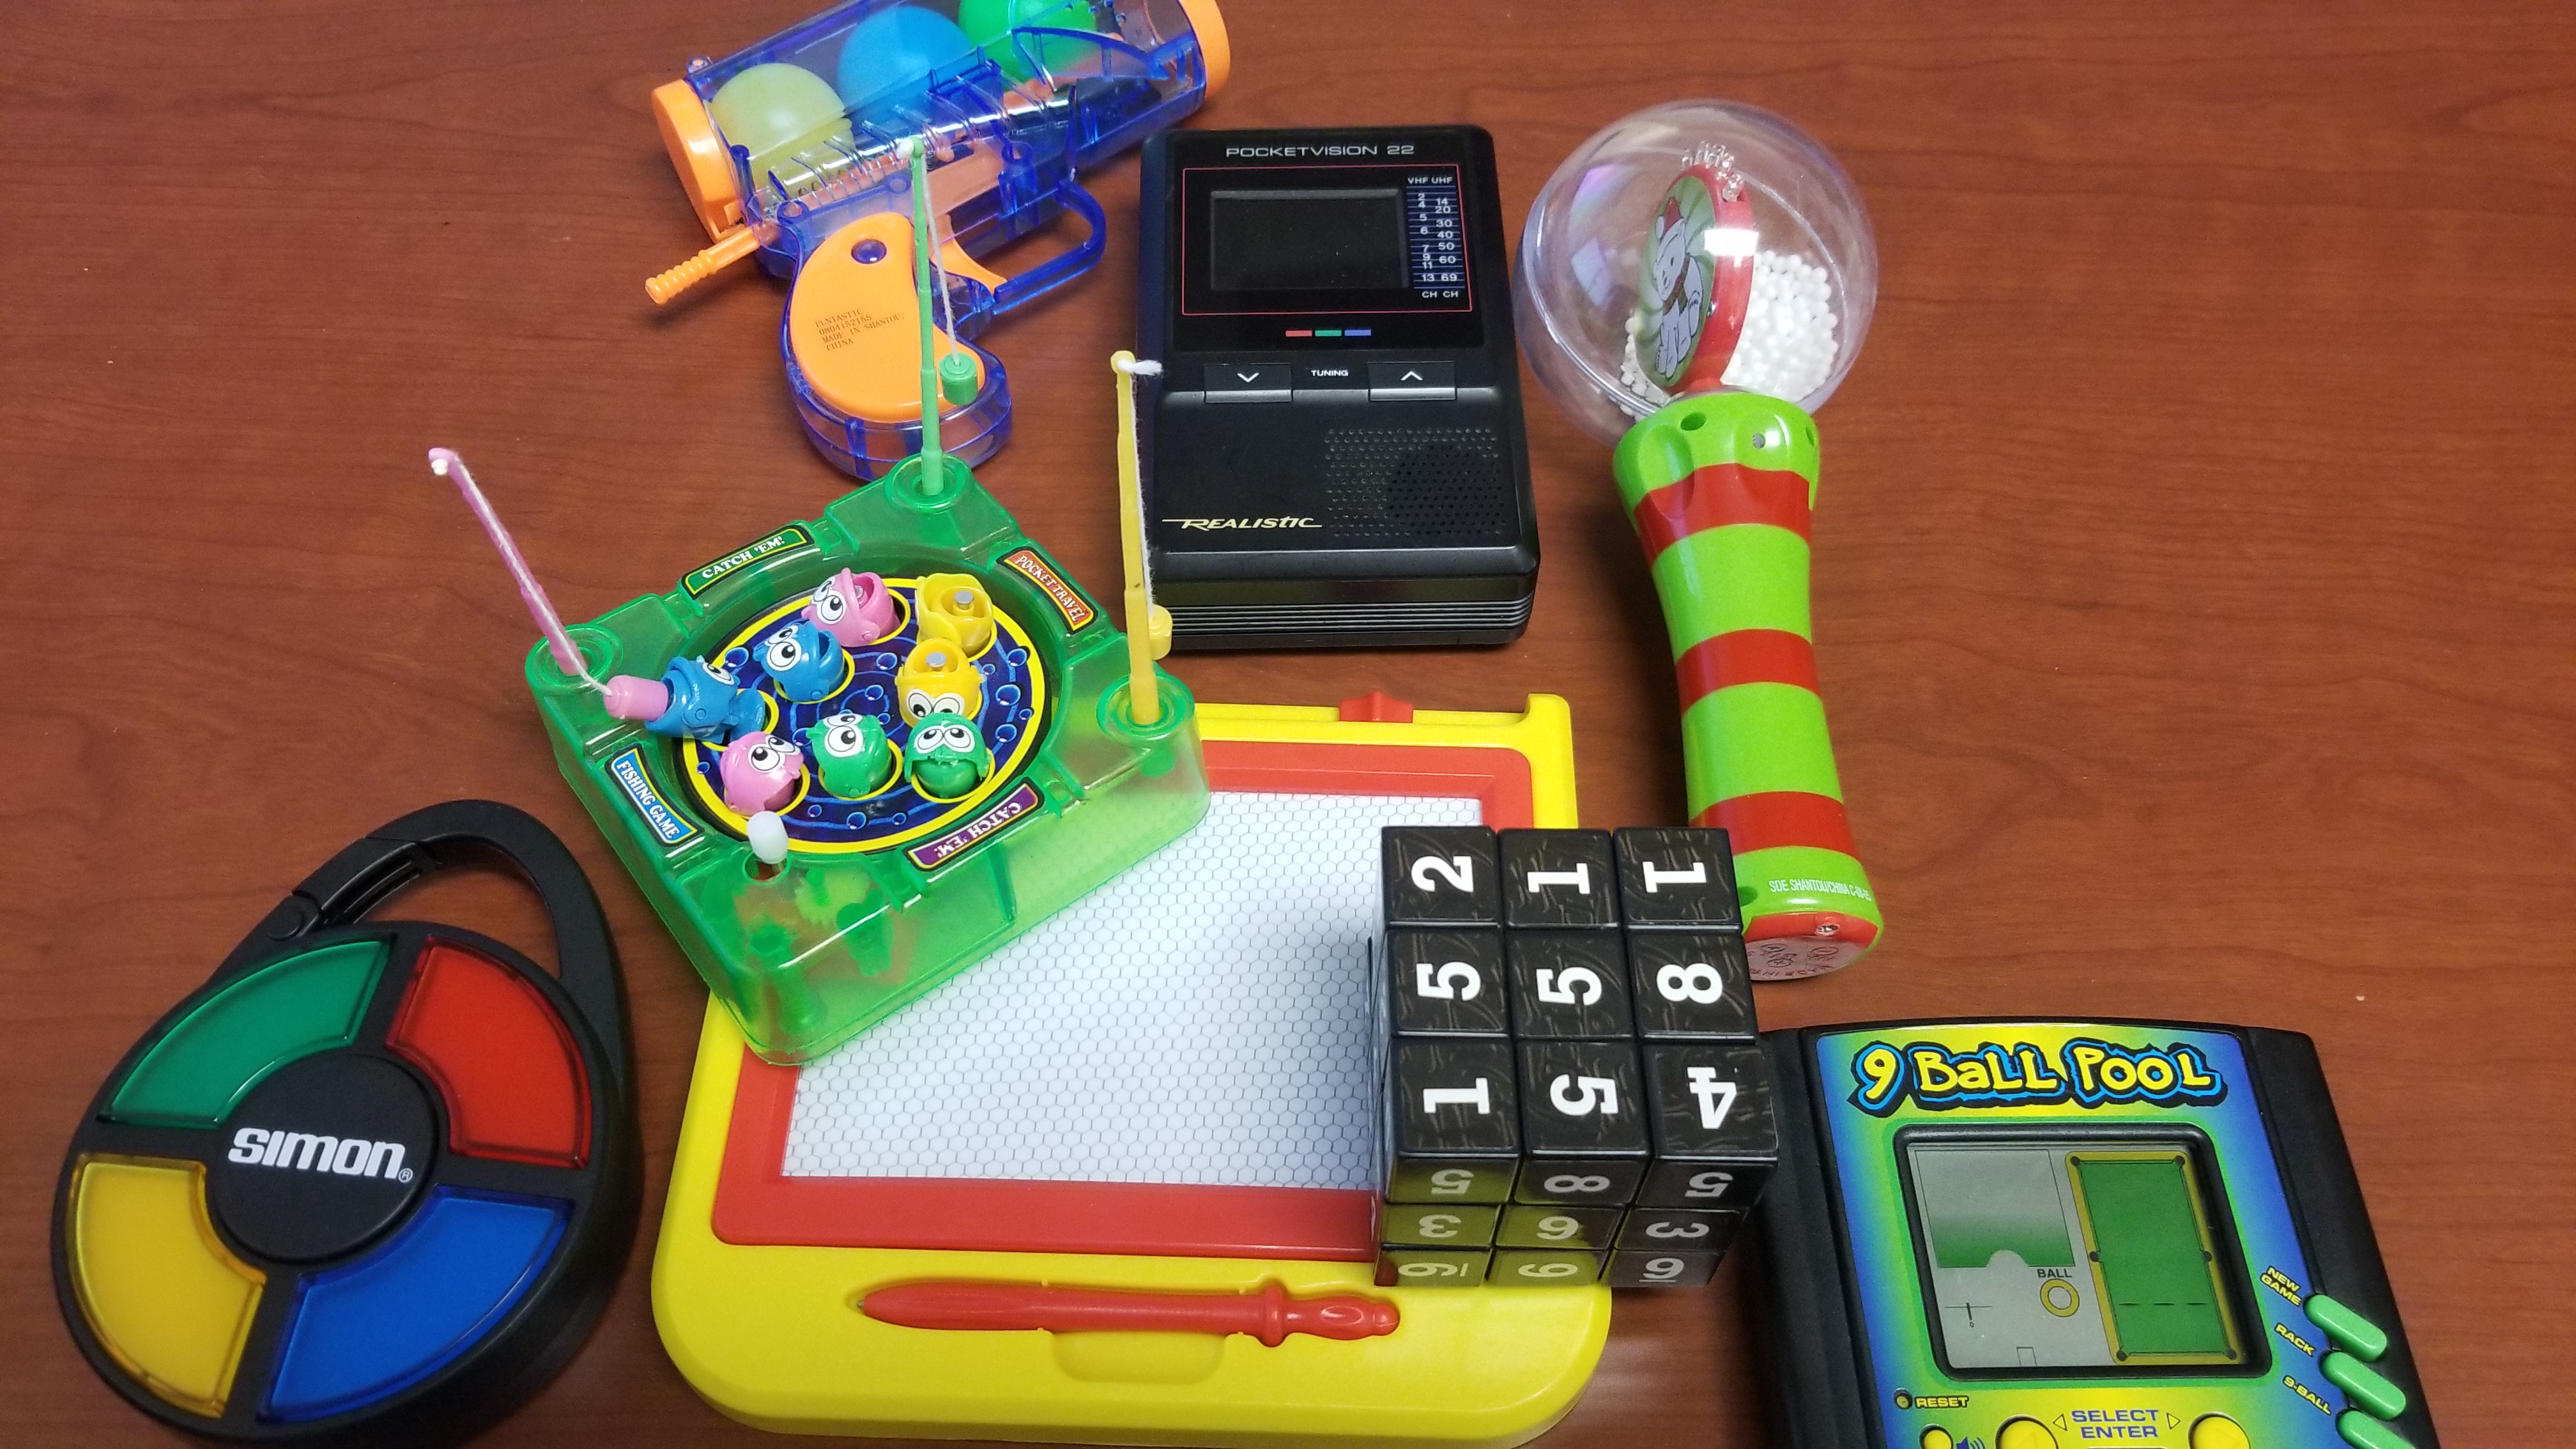 A few fun items for the in-class usability analysis